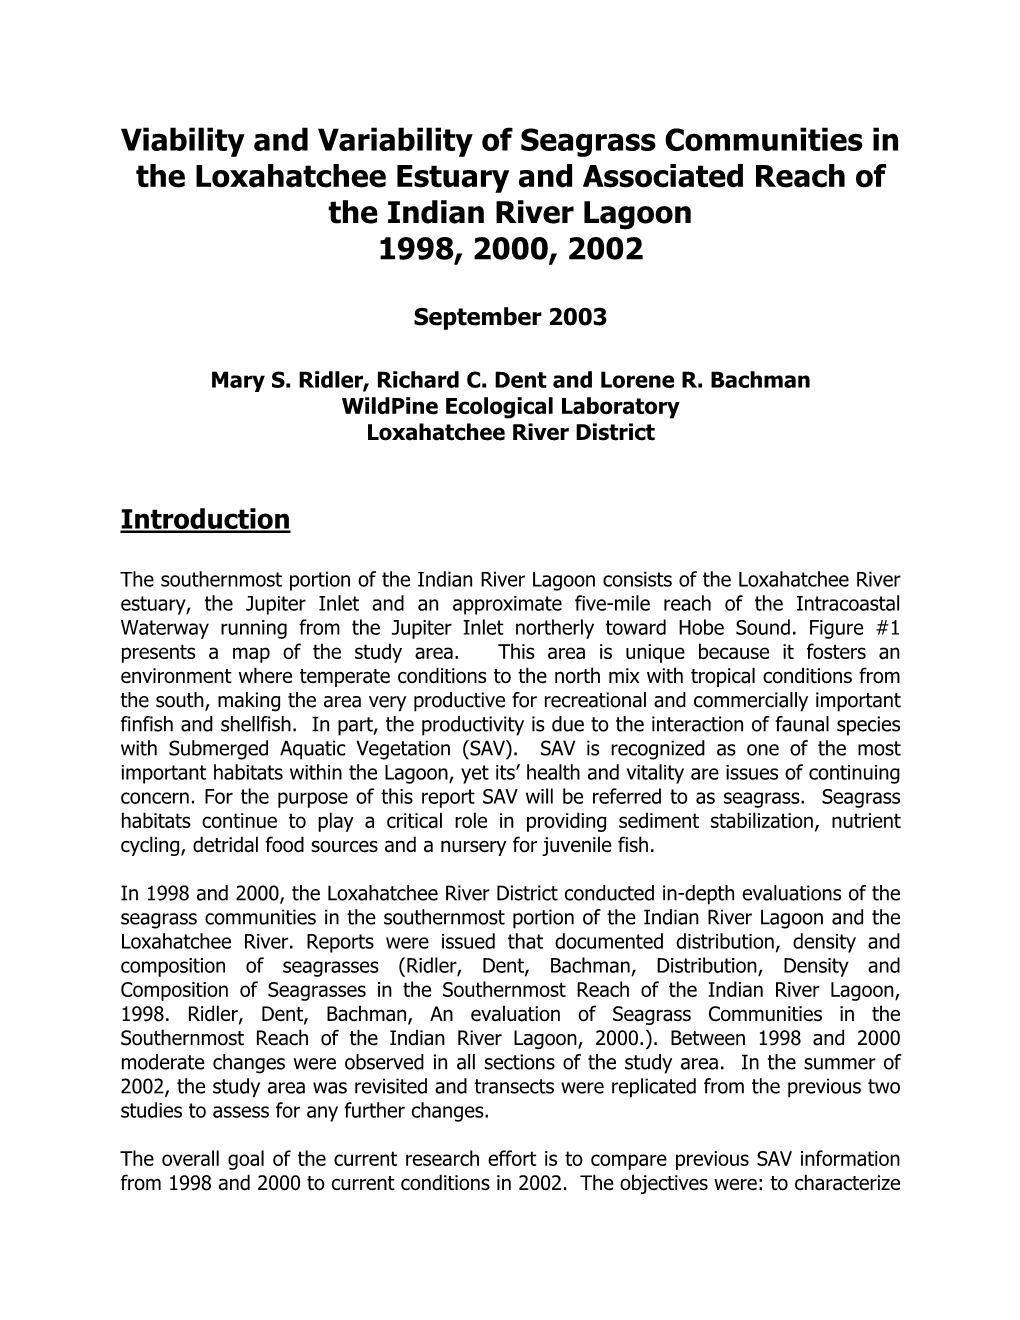 Viability and Variability of Seagrass Communities in the Loxahatchee Estuary and Associated Reach of the Indian River Lagoon 1998, 2000, 2002